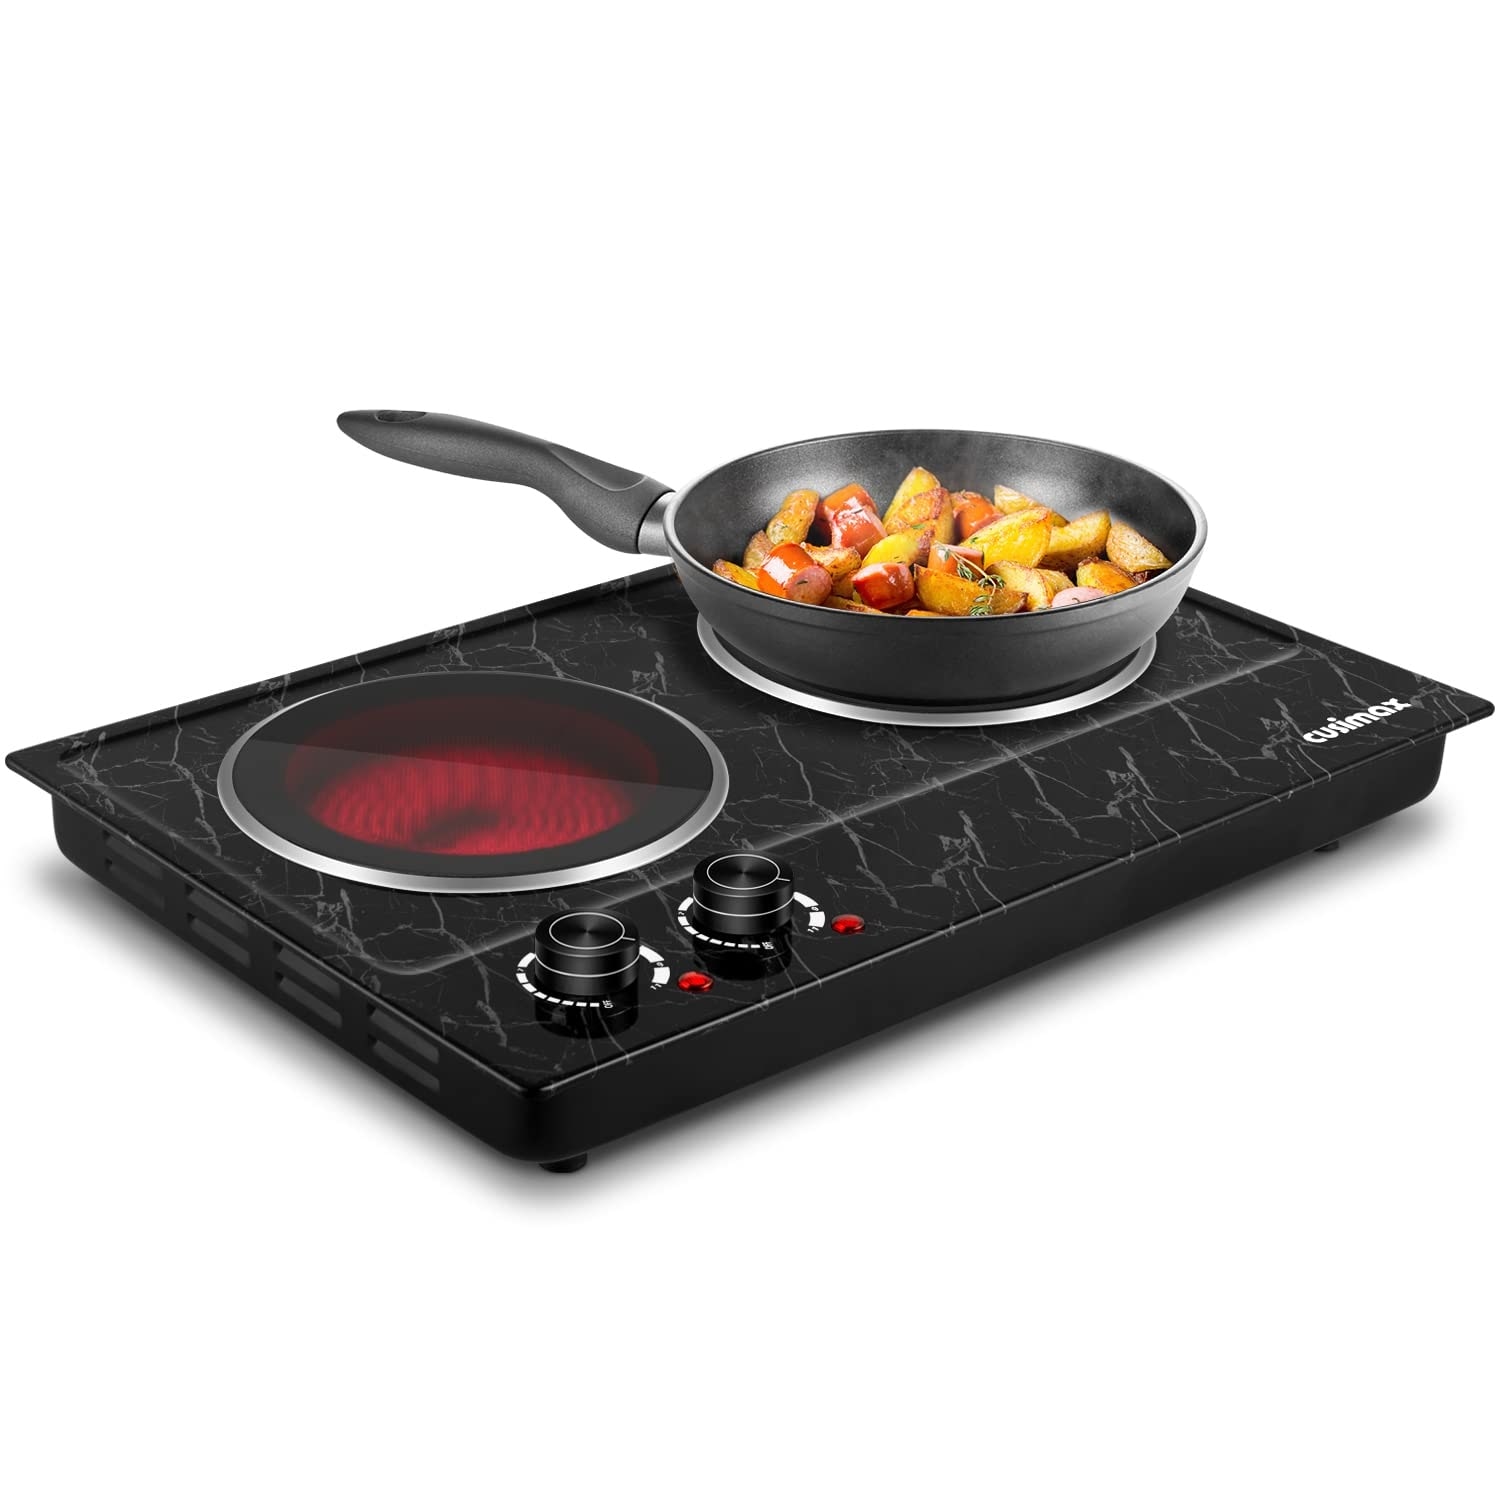 https://ak1.ostkcdn.com/images/products/is/images/direct/de668a888ec42192e63515ff0866f67900c9a539/Double-Burner-Hot-Plate-for-Cooking%2C-1800W-Dual-Control-Portable-Stove-Countertop-Electric-Burner-Infrared-Cooktop.jpg